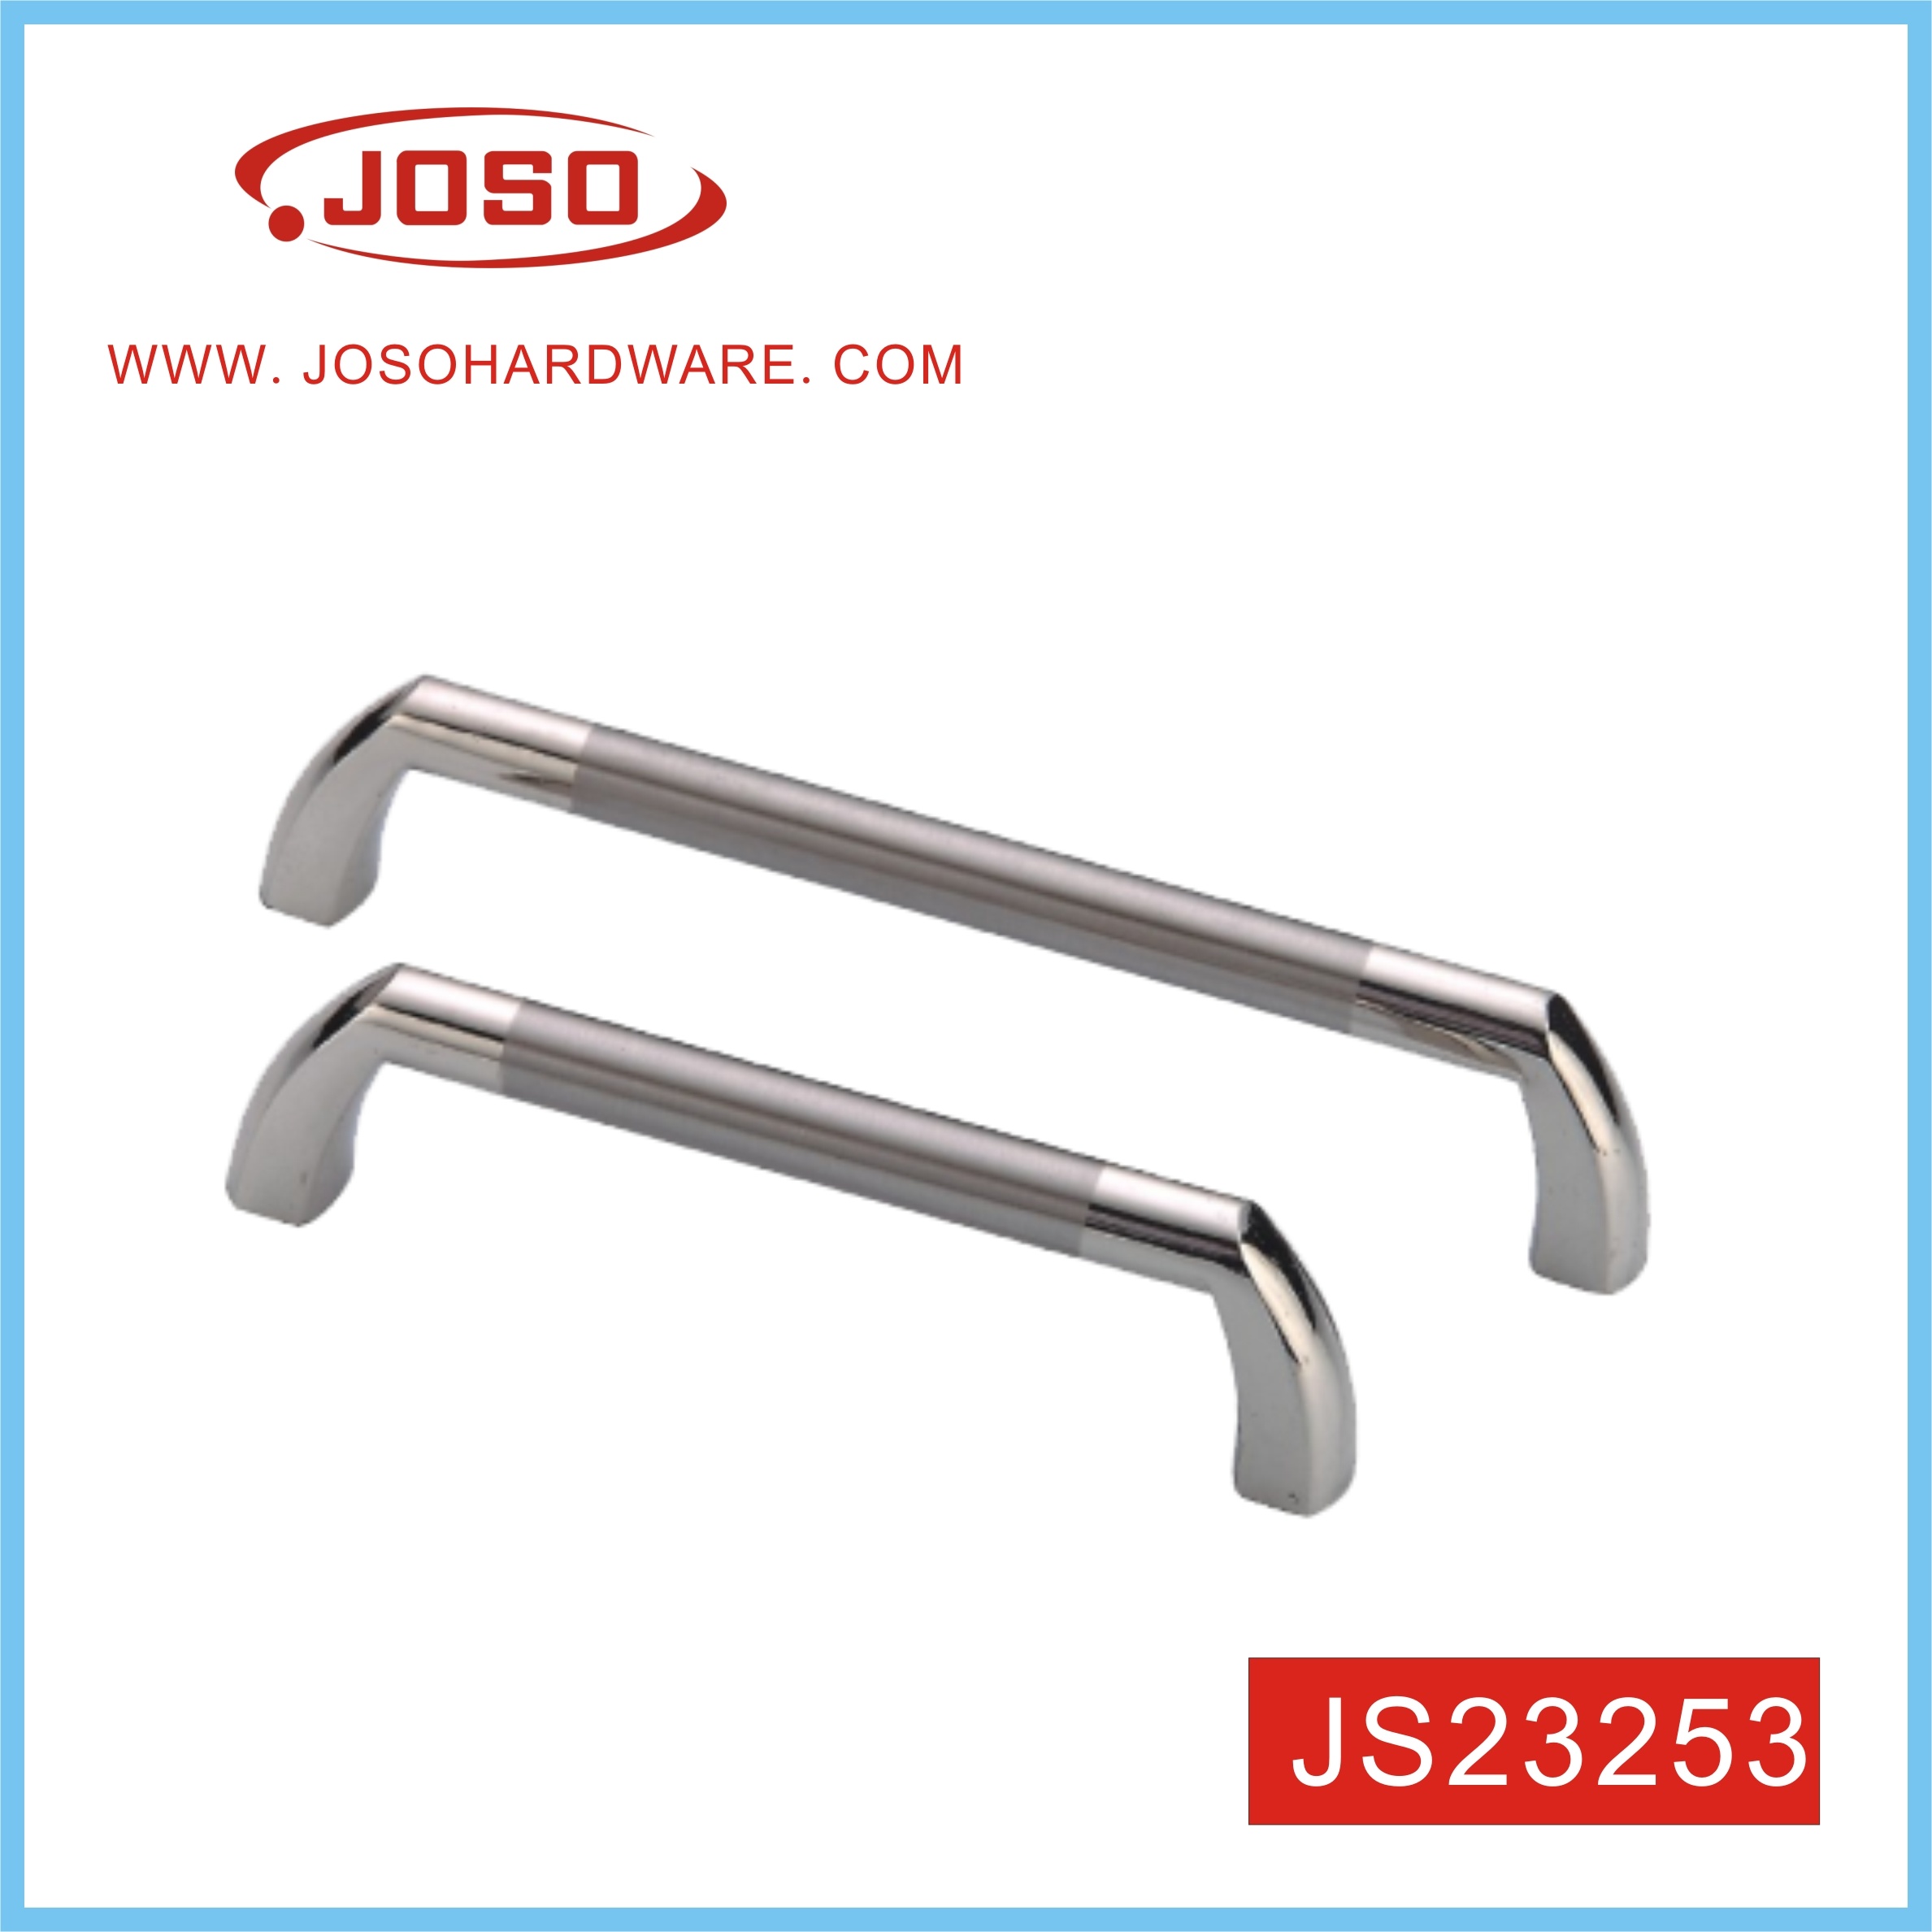 Bright Chrome Plated Furniture Pull Handle for Cabinet Drawer